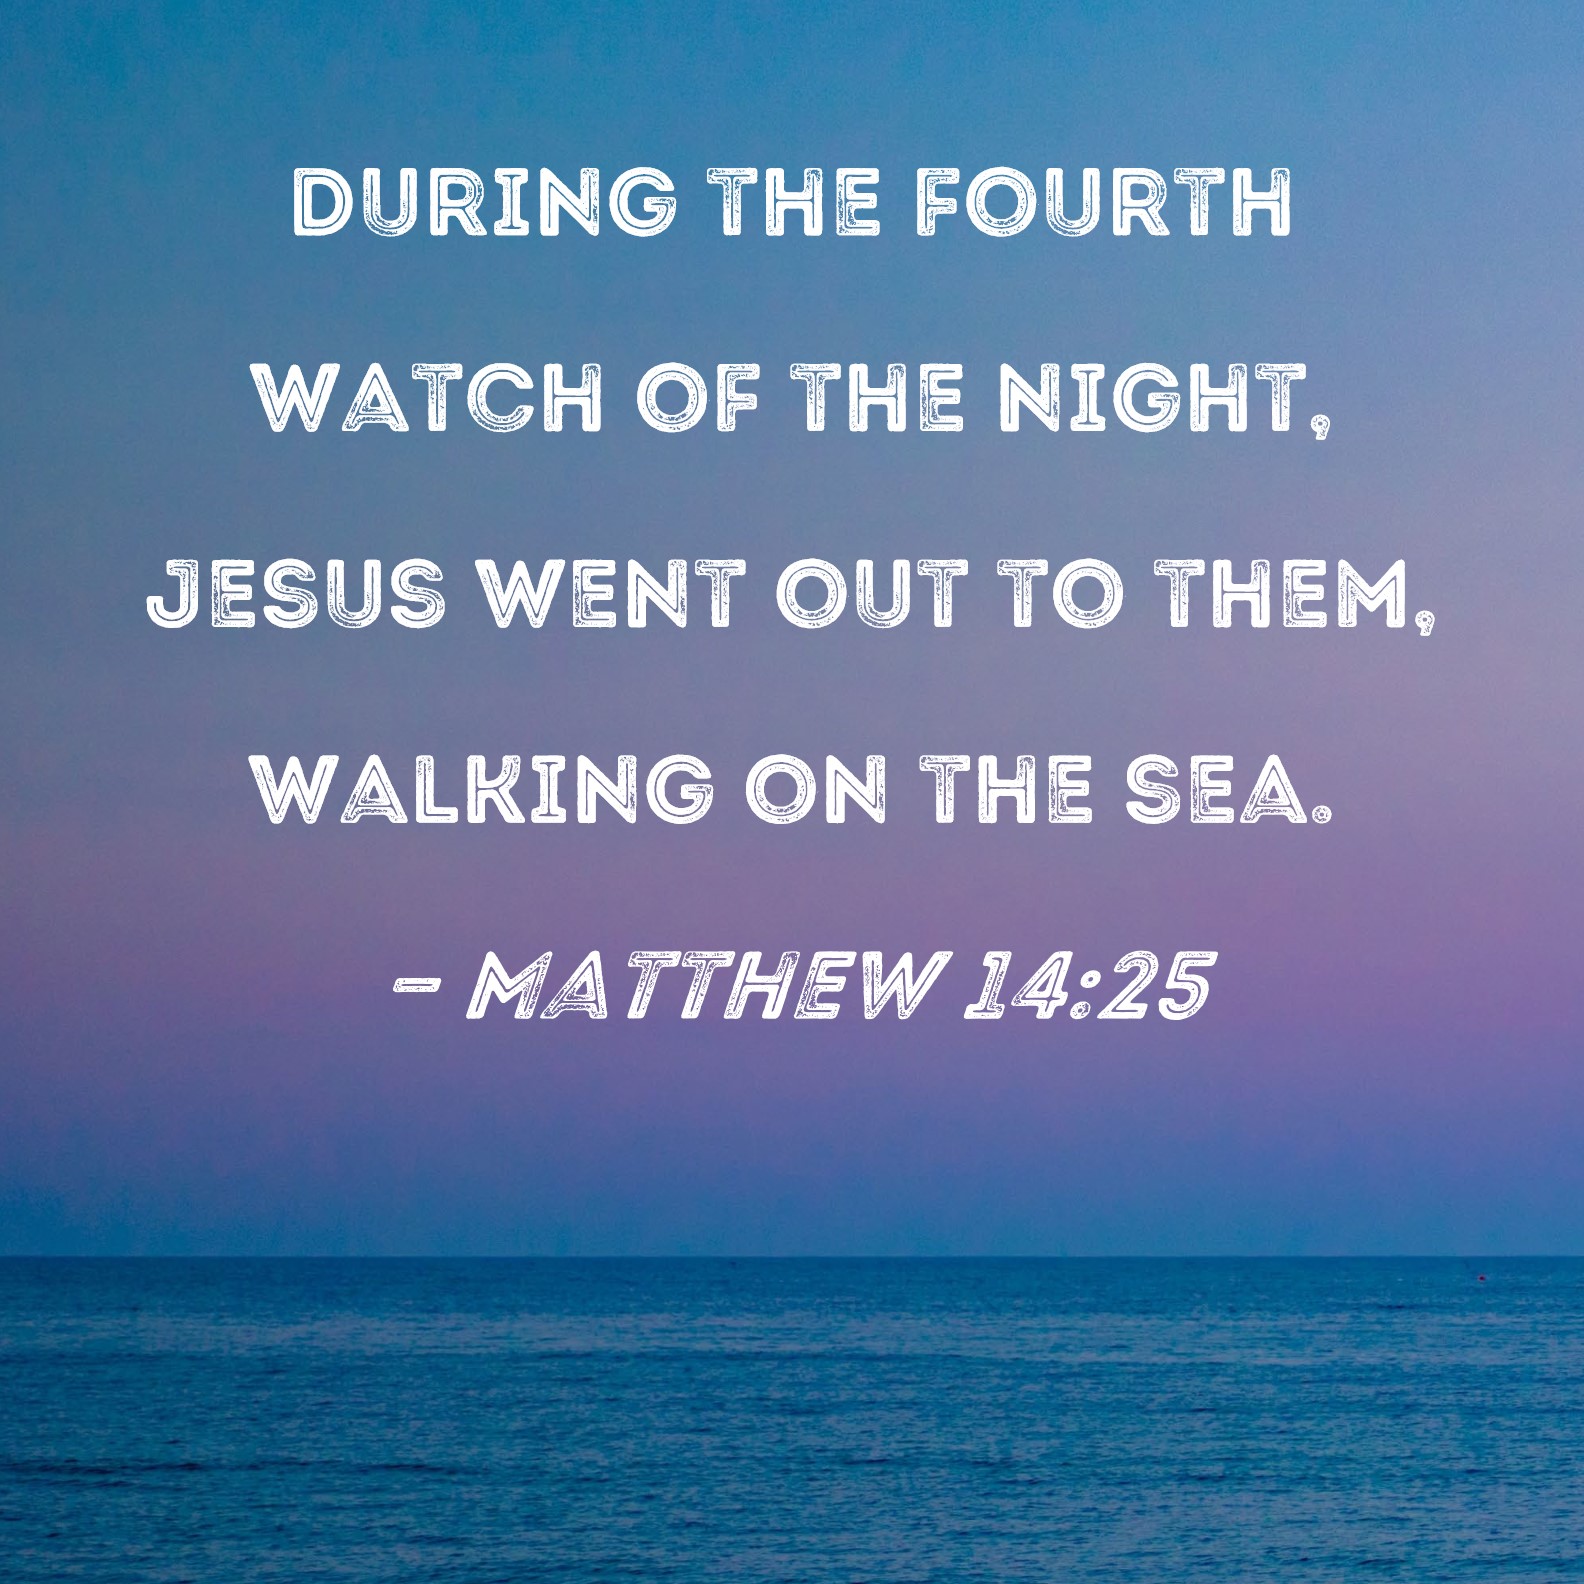 Matthew 1425 During the fourth watch of the night, Jesus went out to